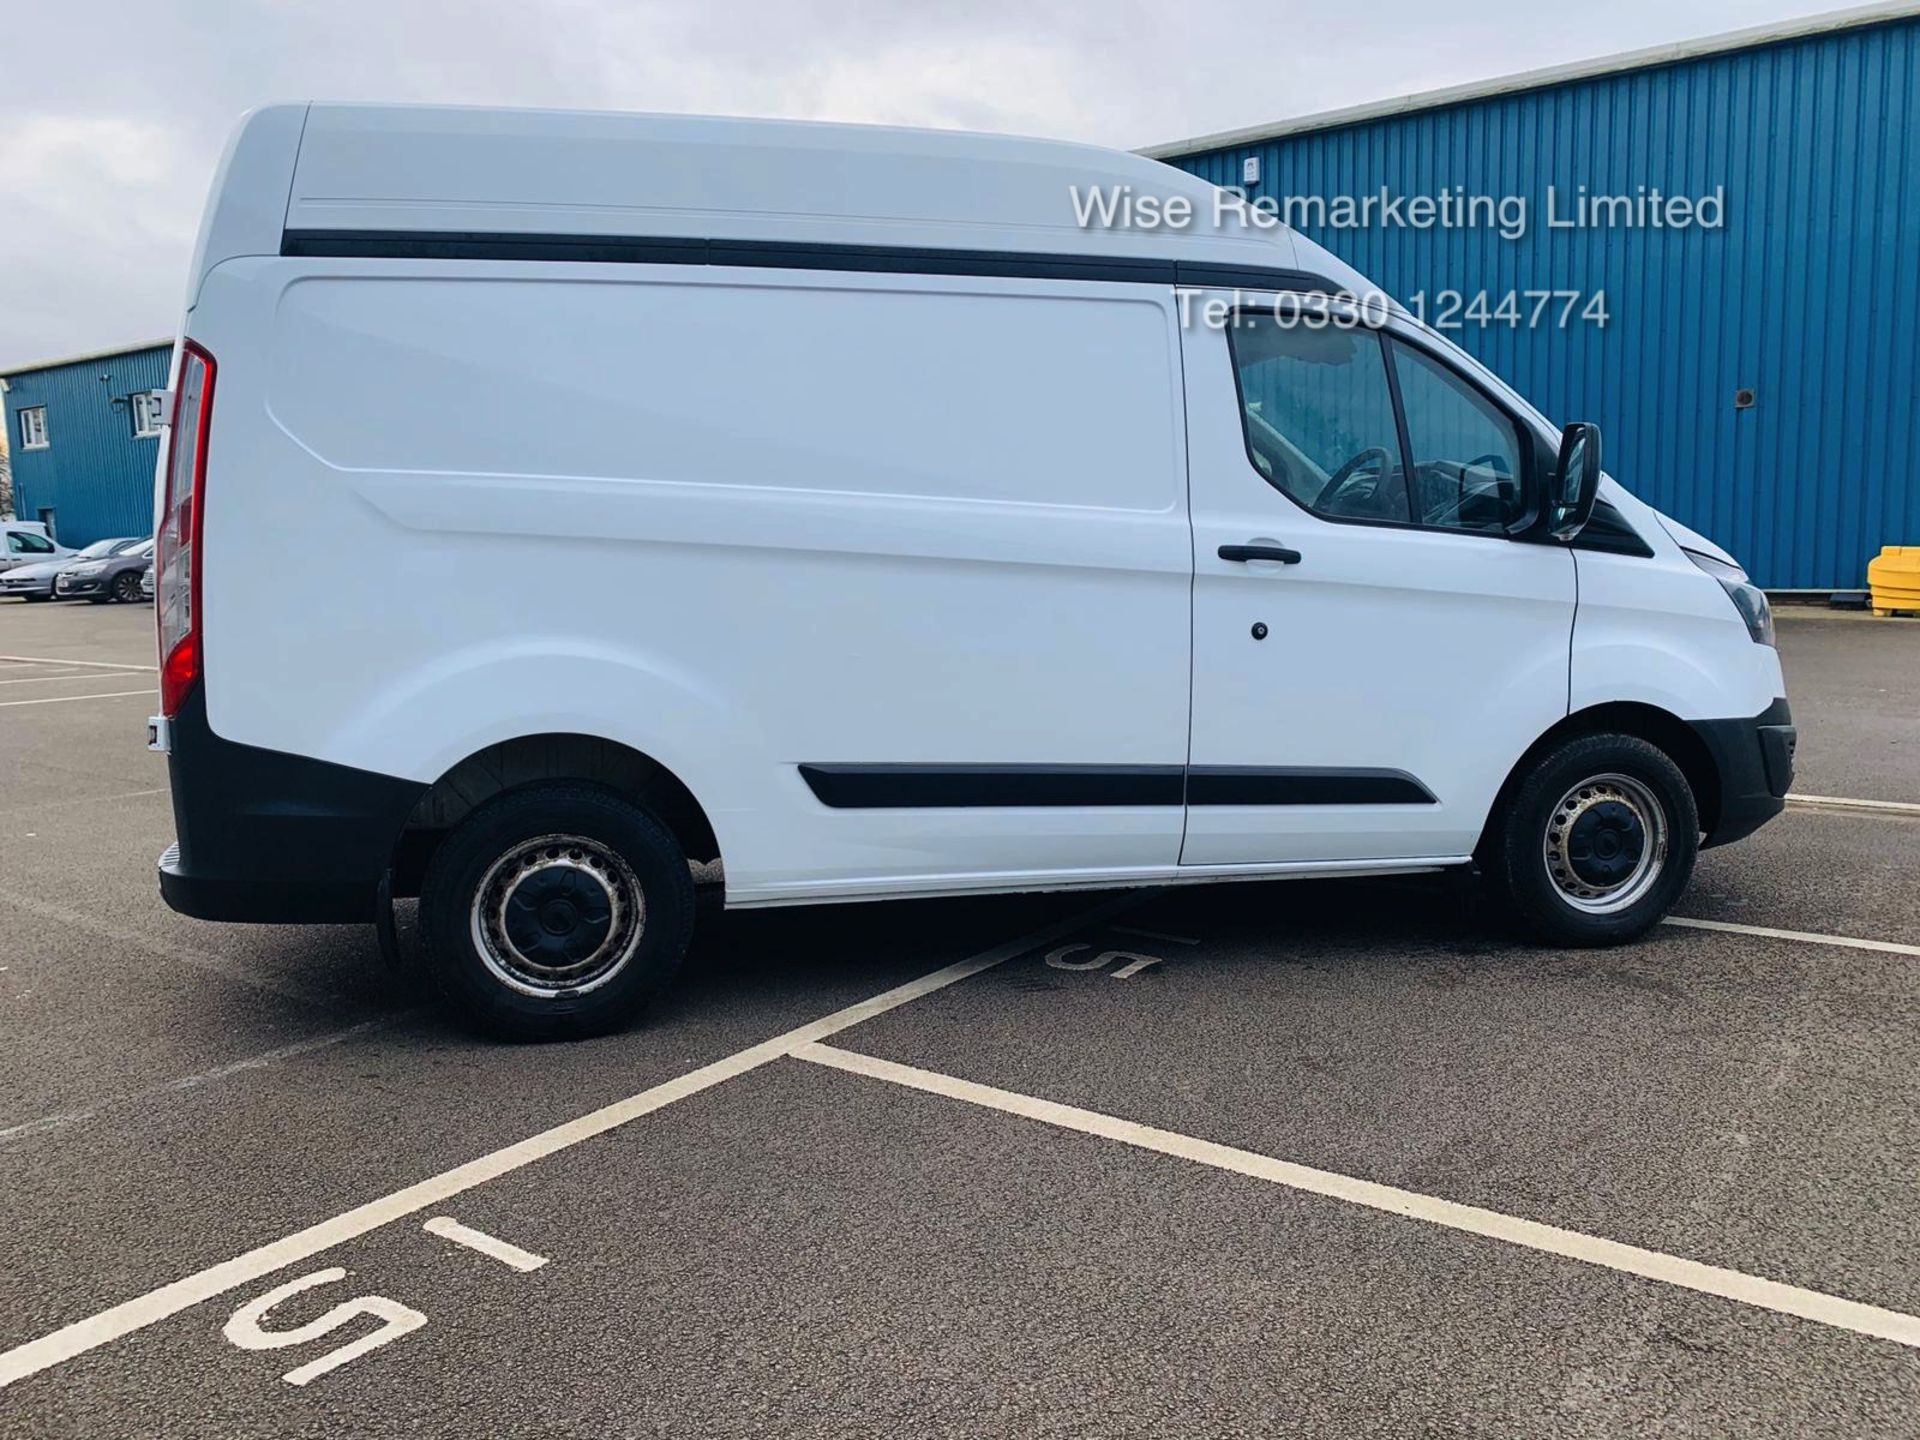 (RESERVE MET) Ford Transit Custom 2.2 TDCI 290 **HIGH ROOF** - 2016 Model - AIR CON- 1 OWNER- FSH- - Image 7 of 24